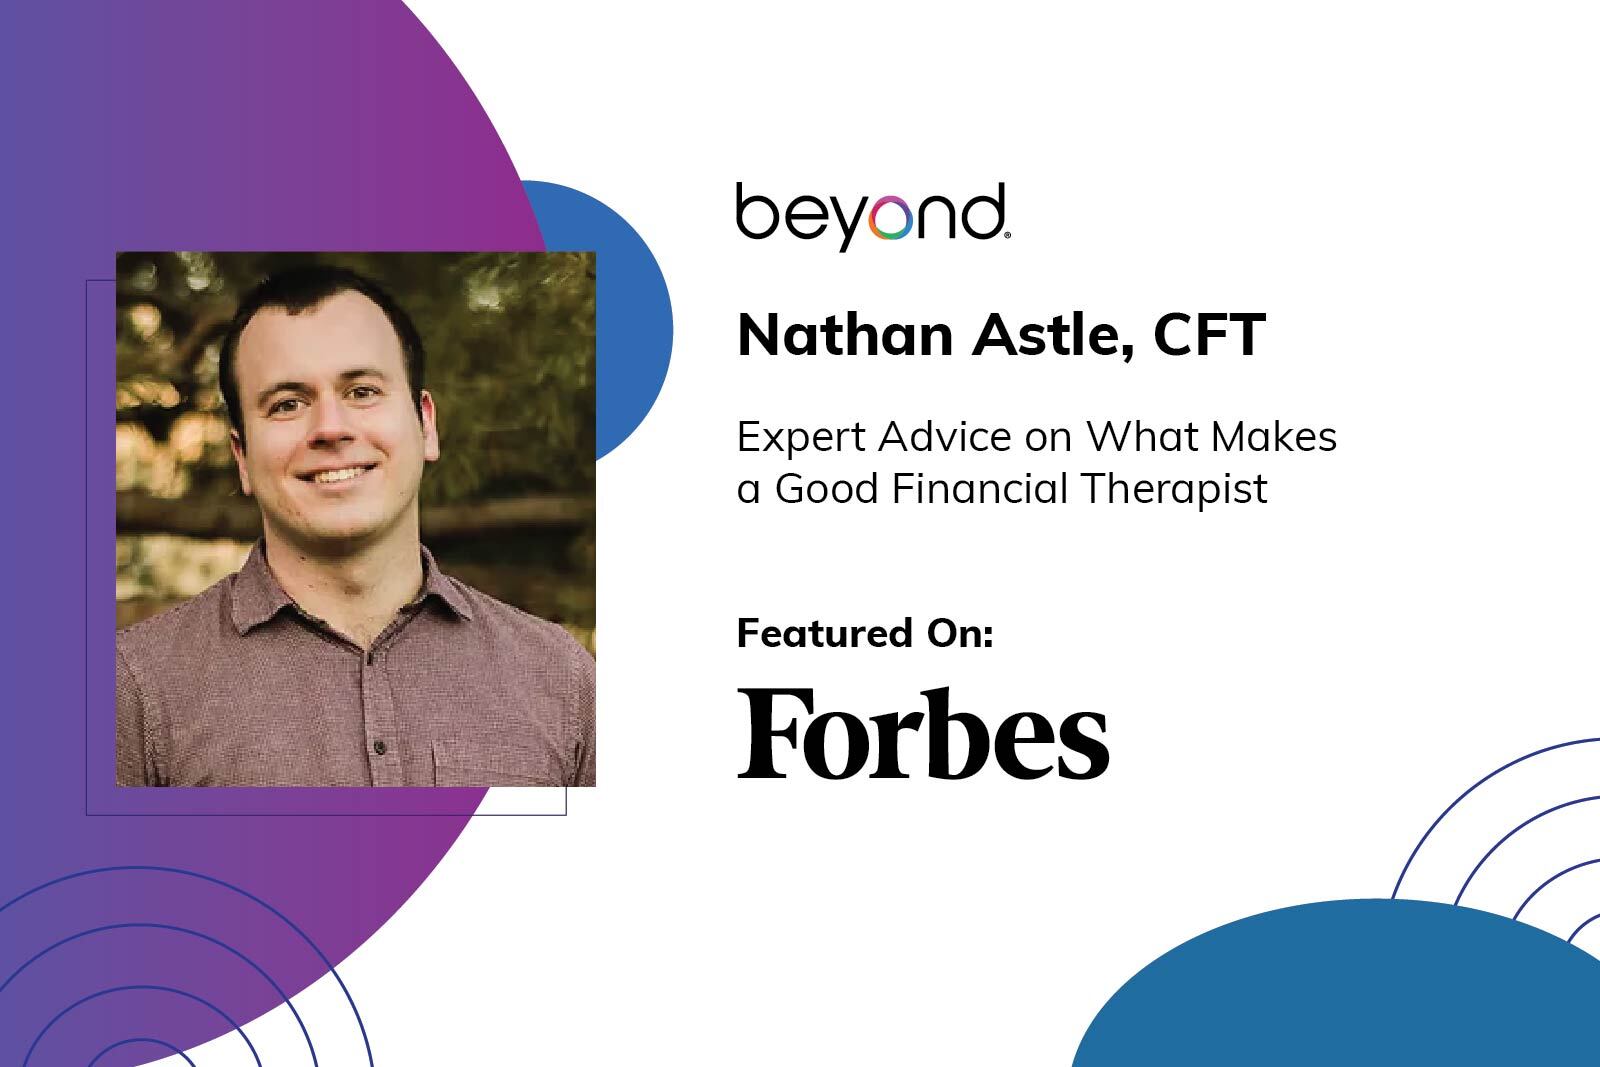 Forbes spoke to our Nathan Astle about financial therapy.